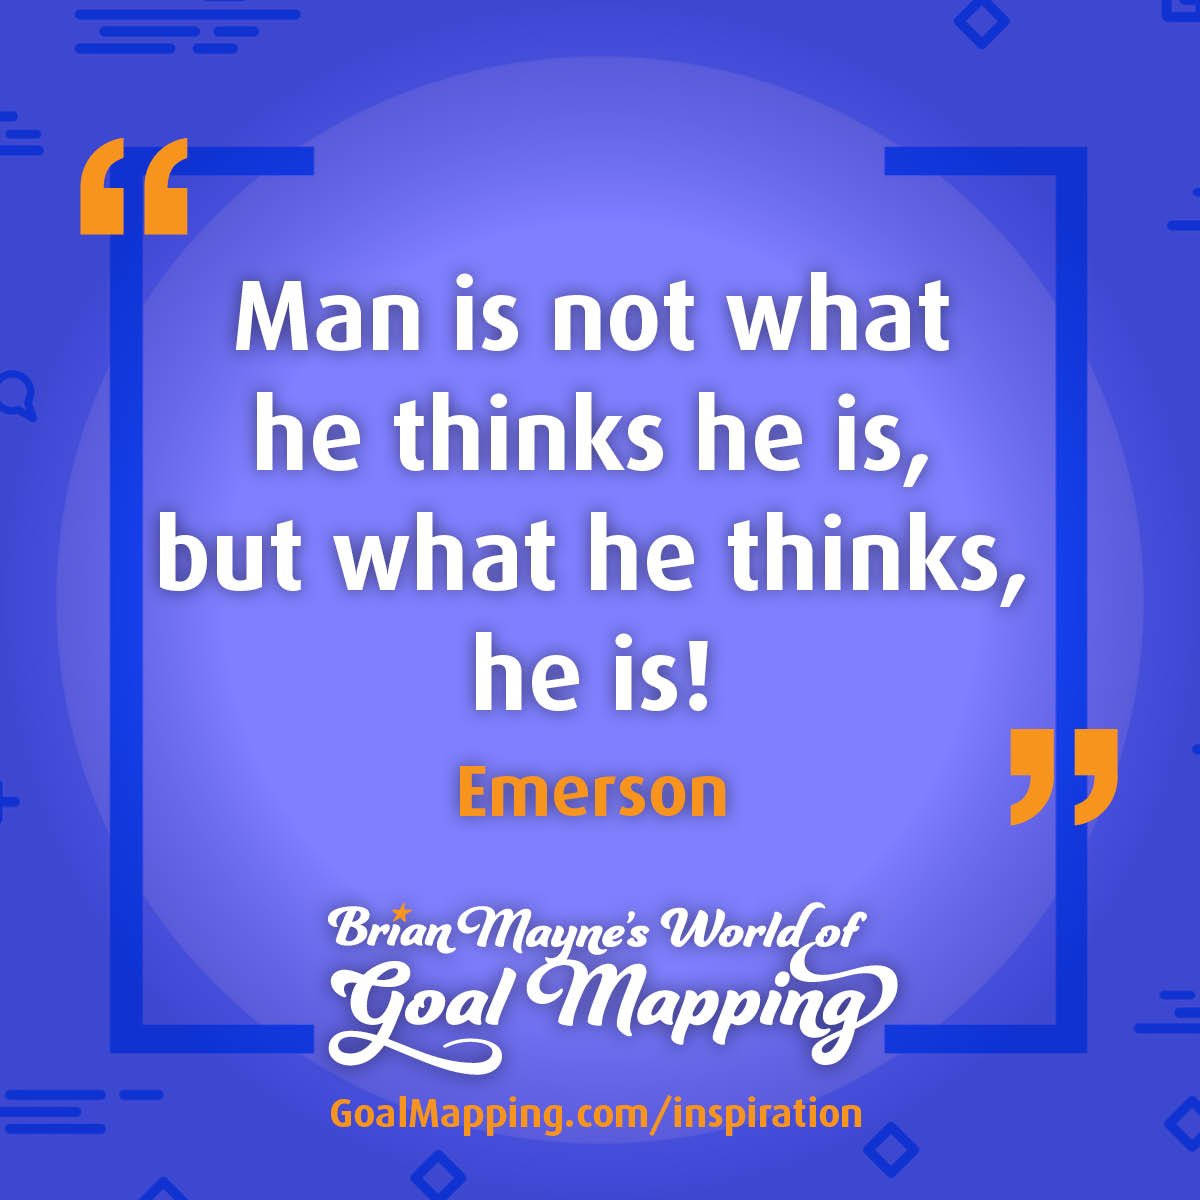 "Man is not what he thinks he is, but what he thinks, he is!" Emerson